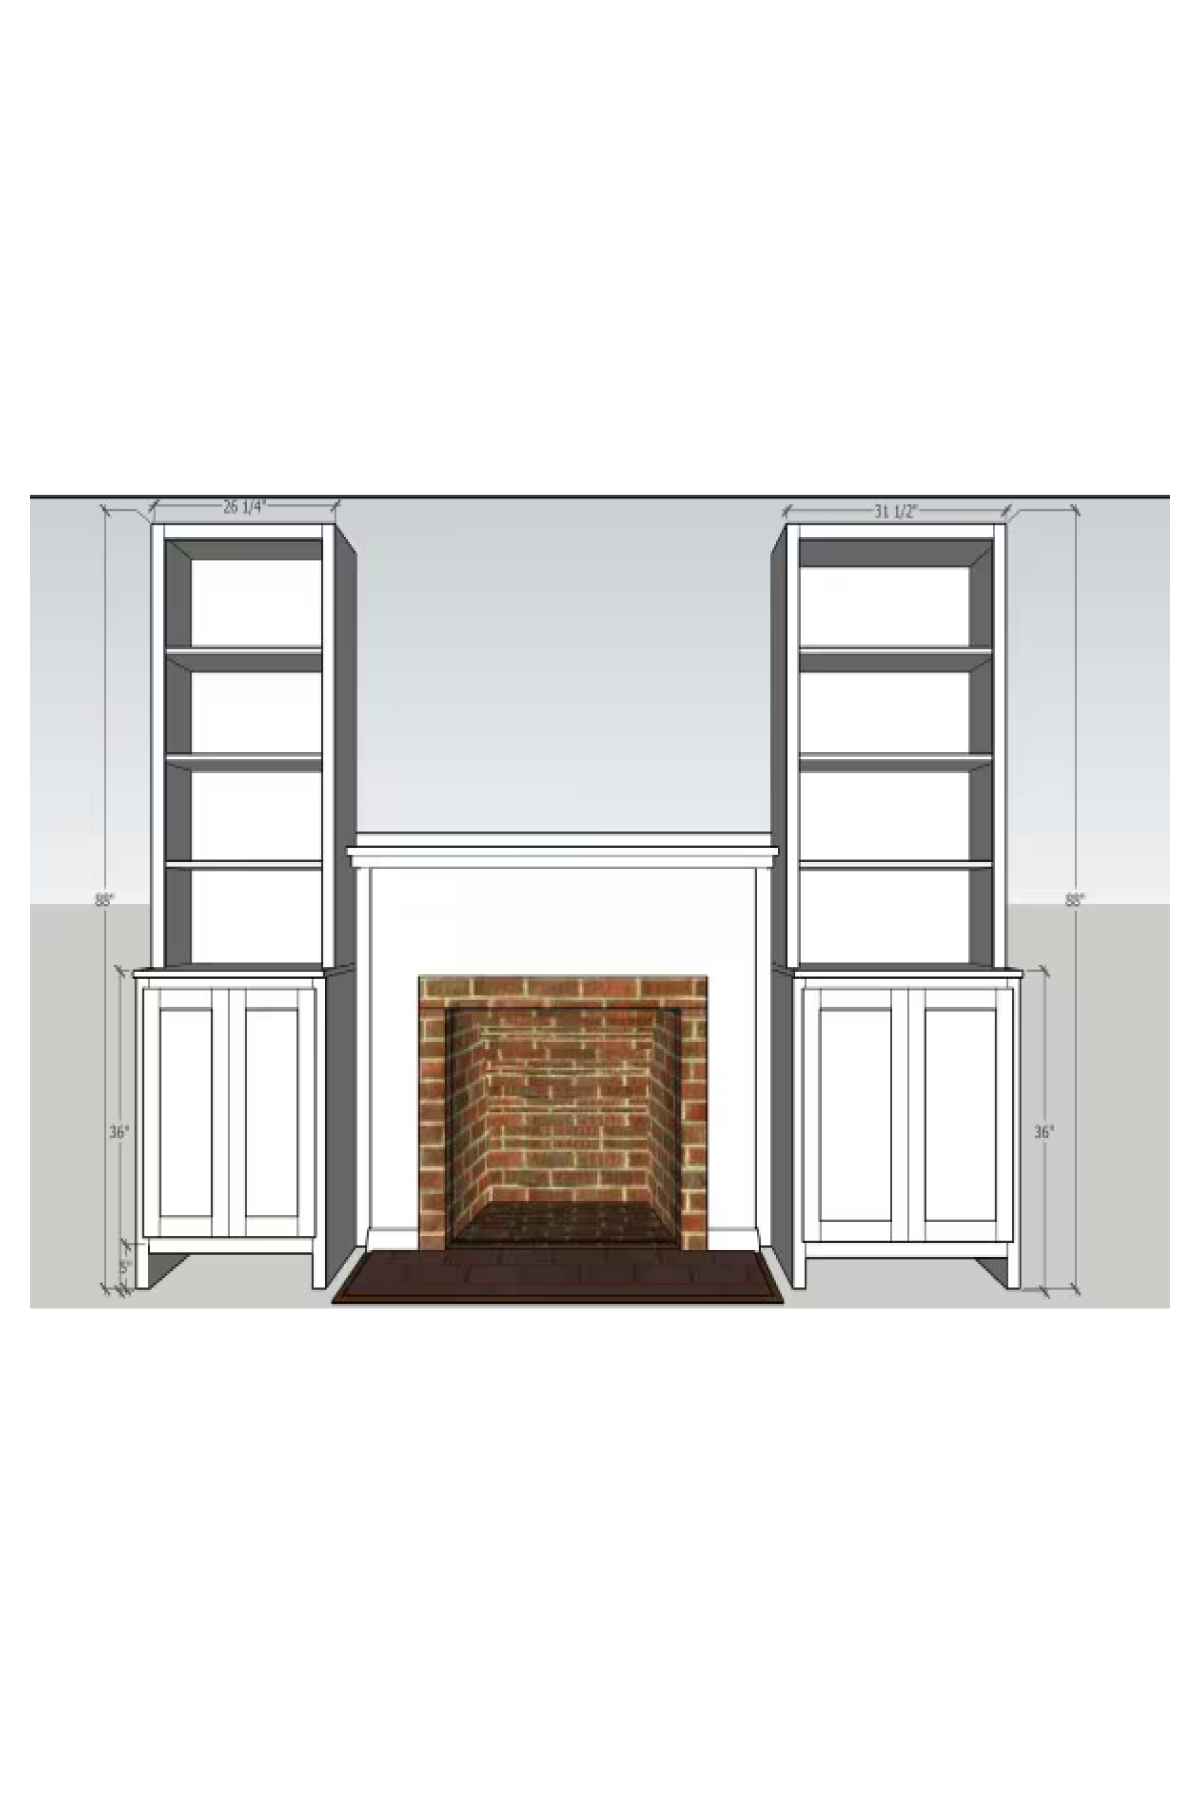 CAD of two stepback bookcase hutches on either side of the fireplace.